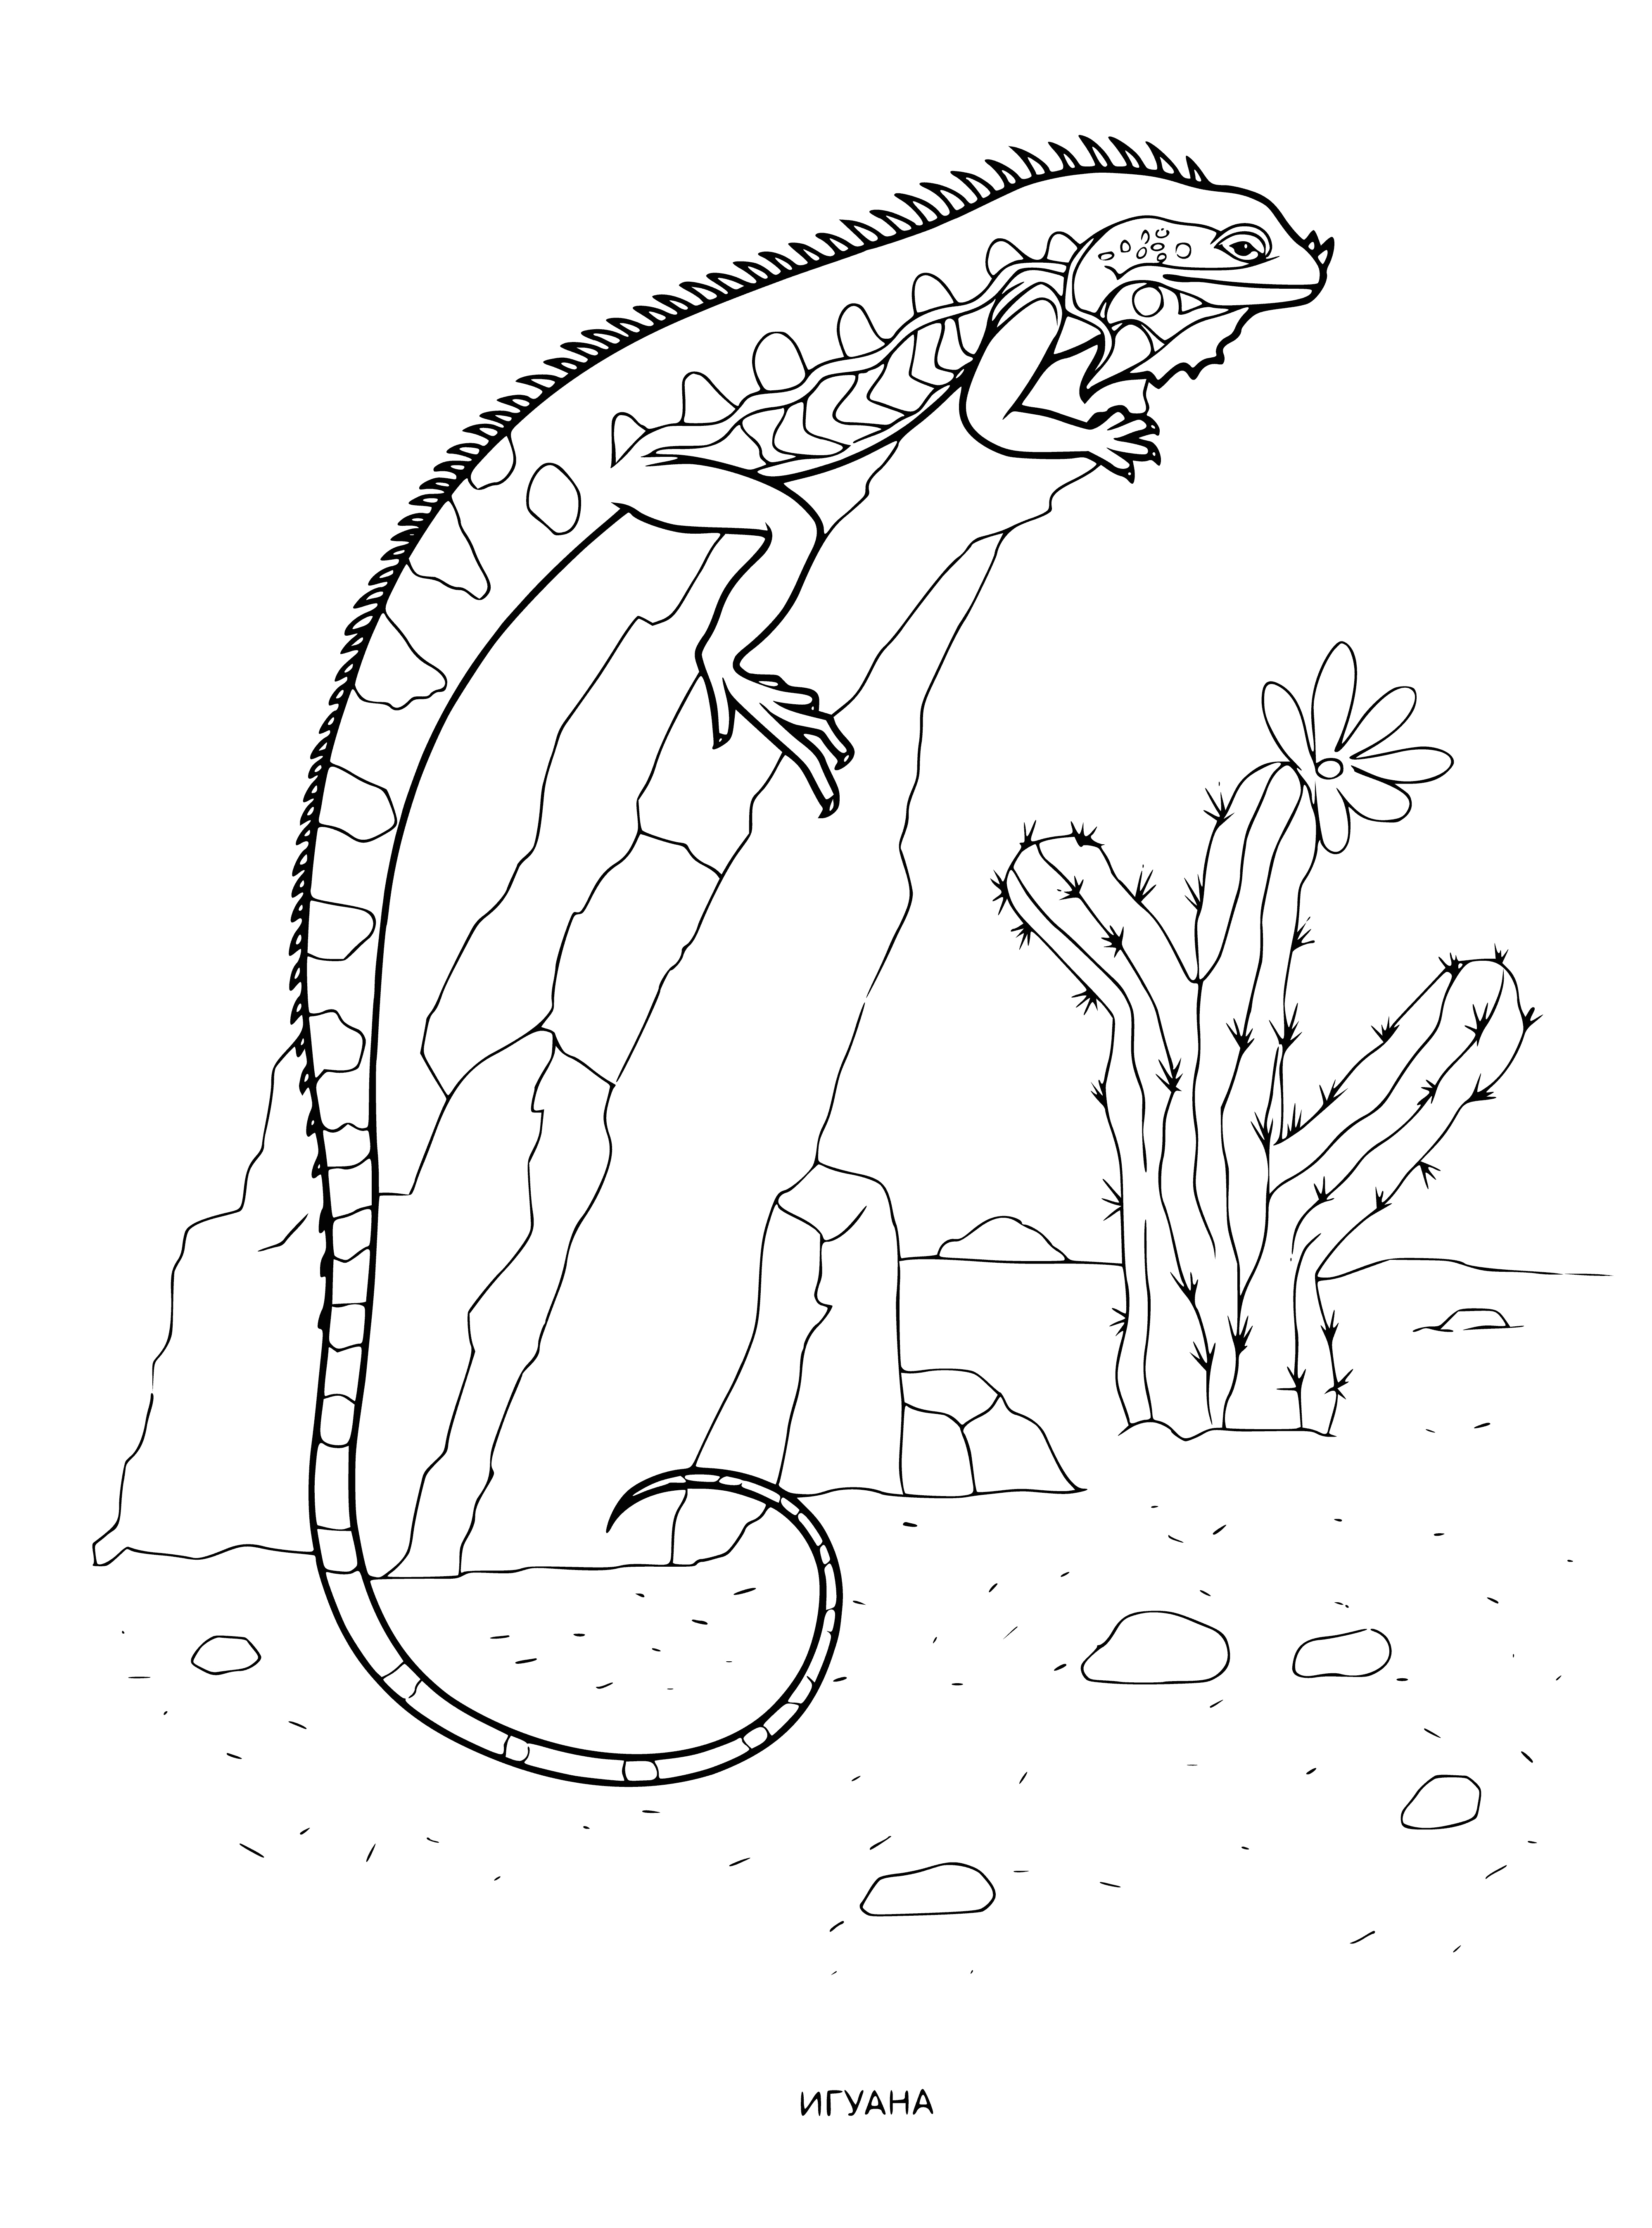 coloring page: Iguanas are large reptiles native to Central & South America. They can be green or grey & grow to over 6ft long. Iguanas are not dangerous, but may be aggressive if provoked.